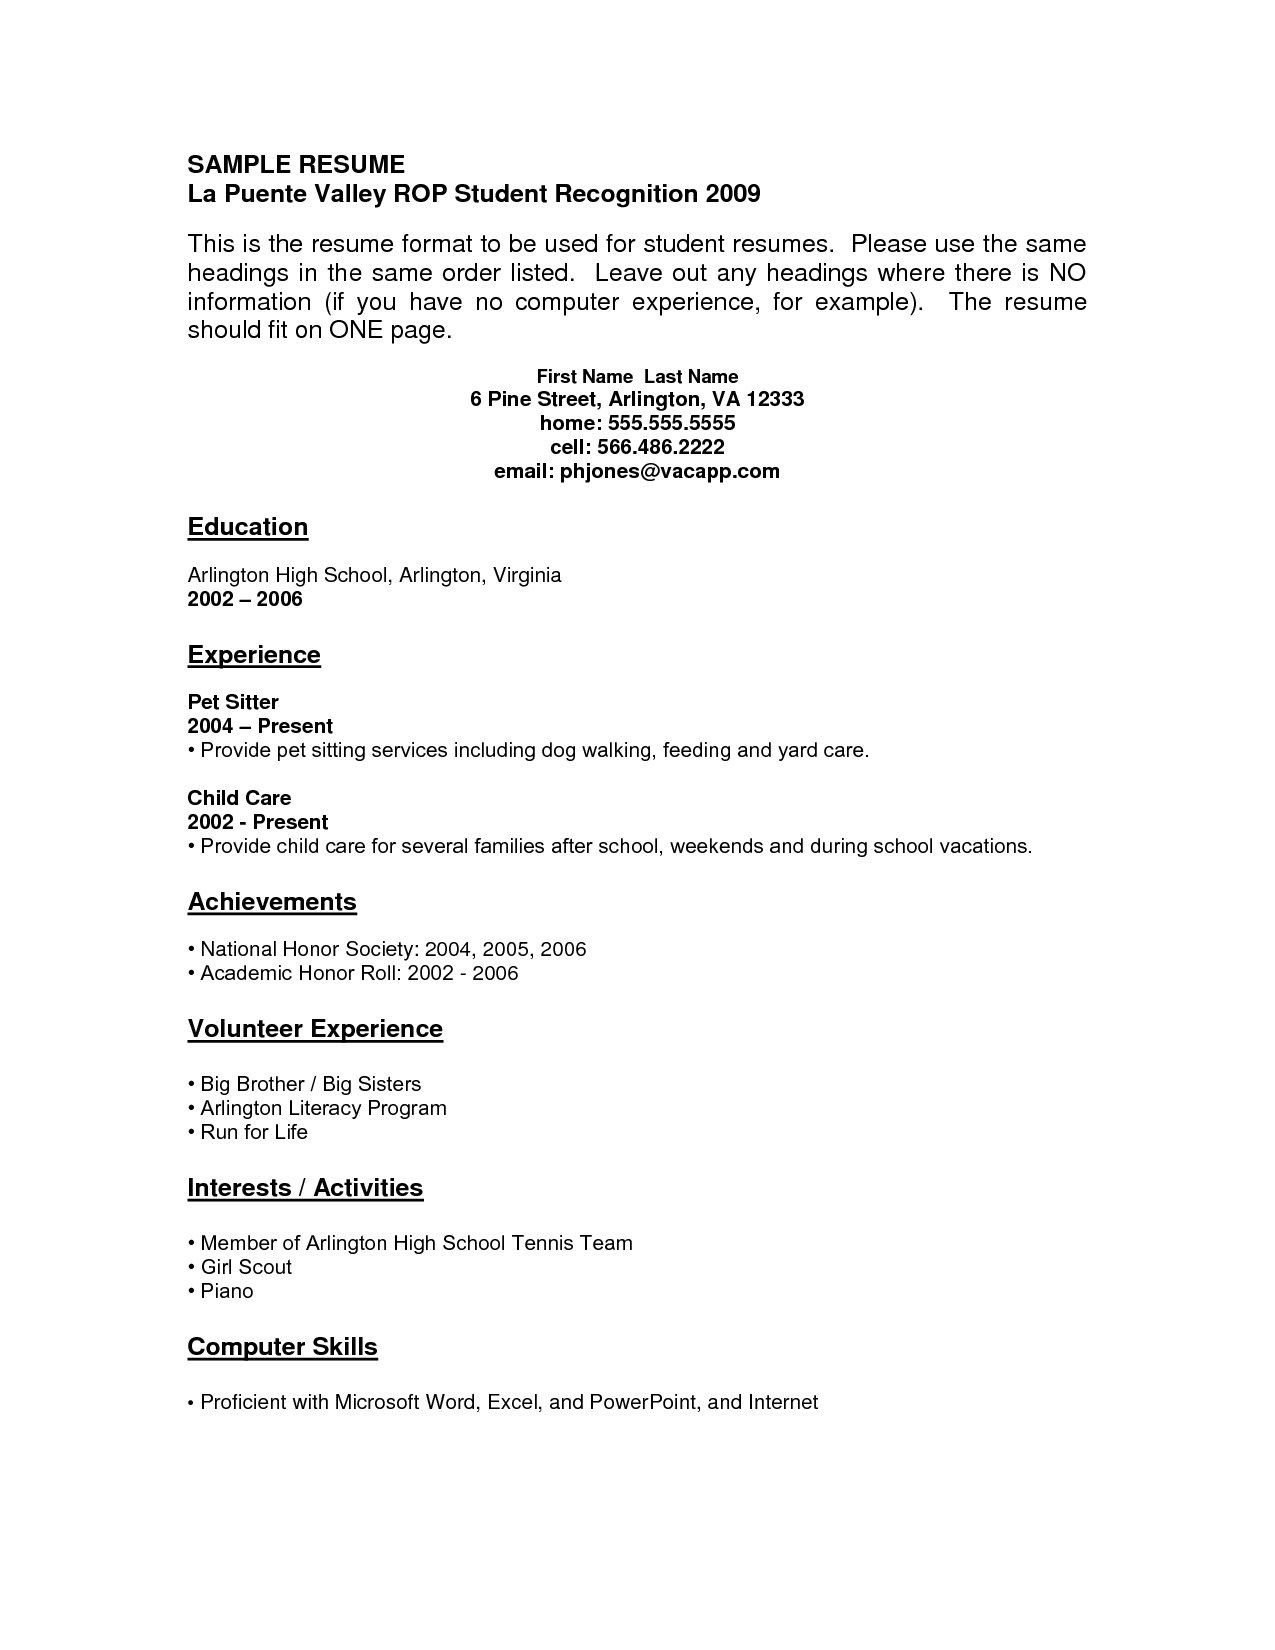 Sample Resume for Highschool Graduate with No Work Experience Resume Examples with No Job Experience – Resume Templates Job …